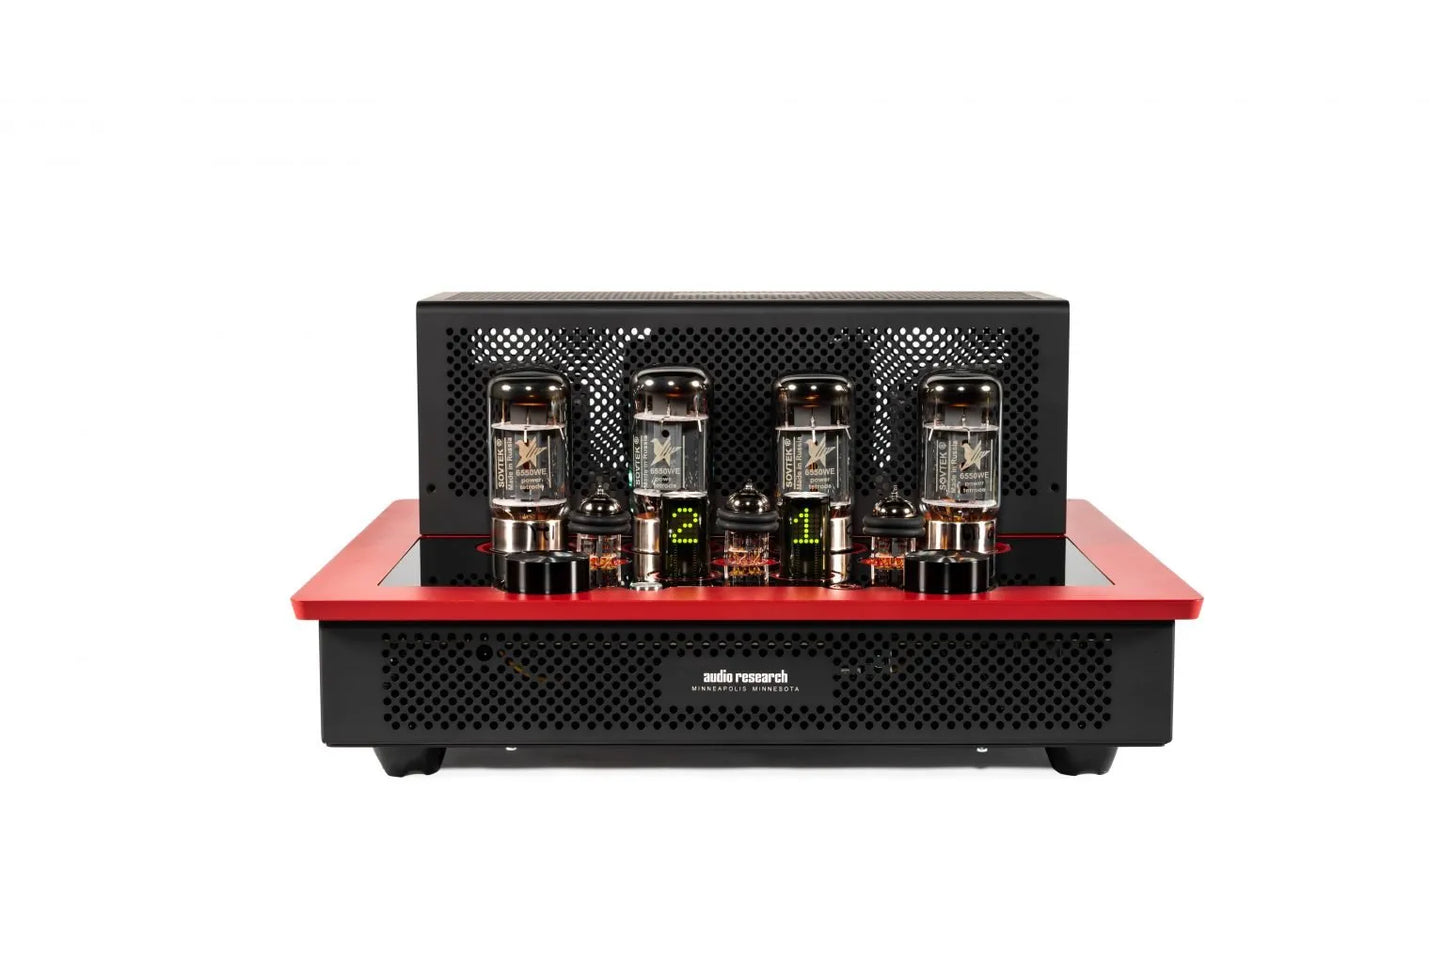 Audio Research I/50 Integrated Amplifier